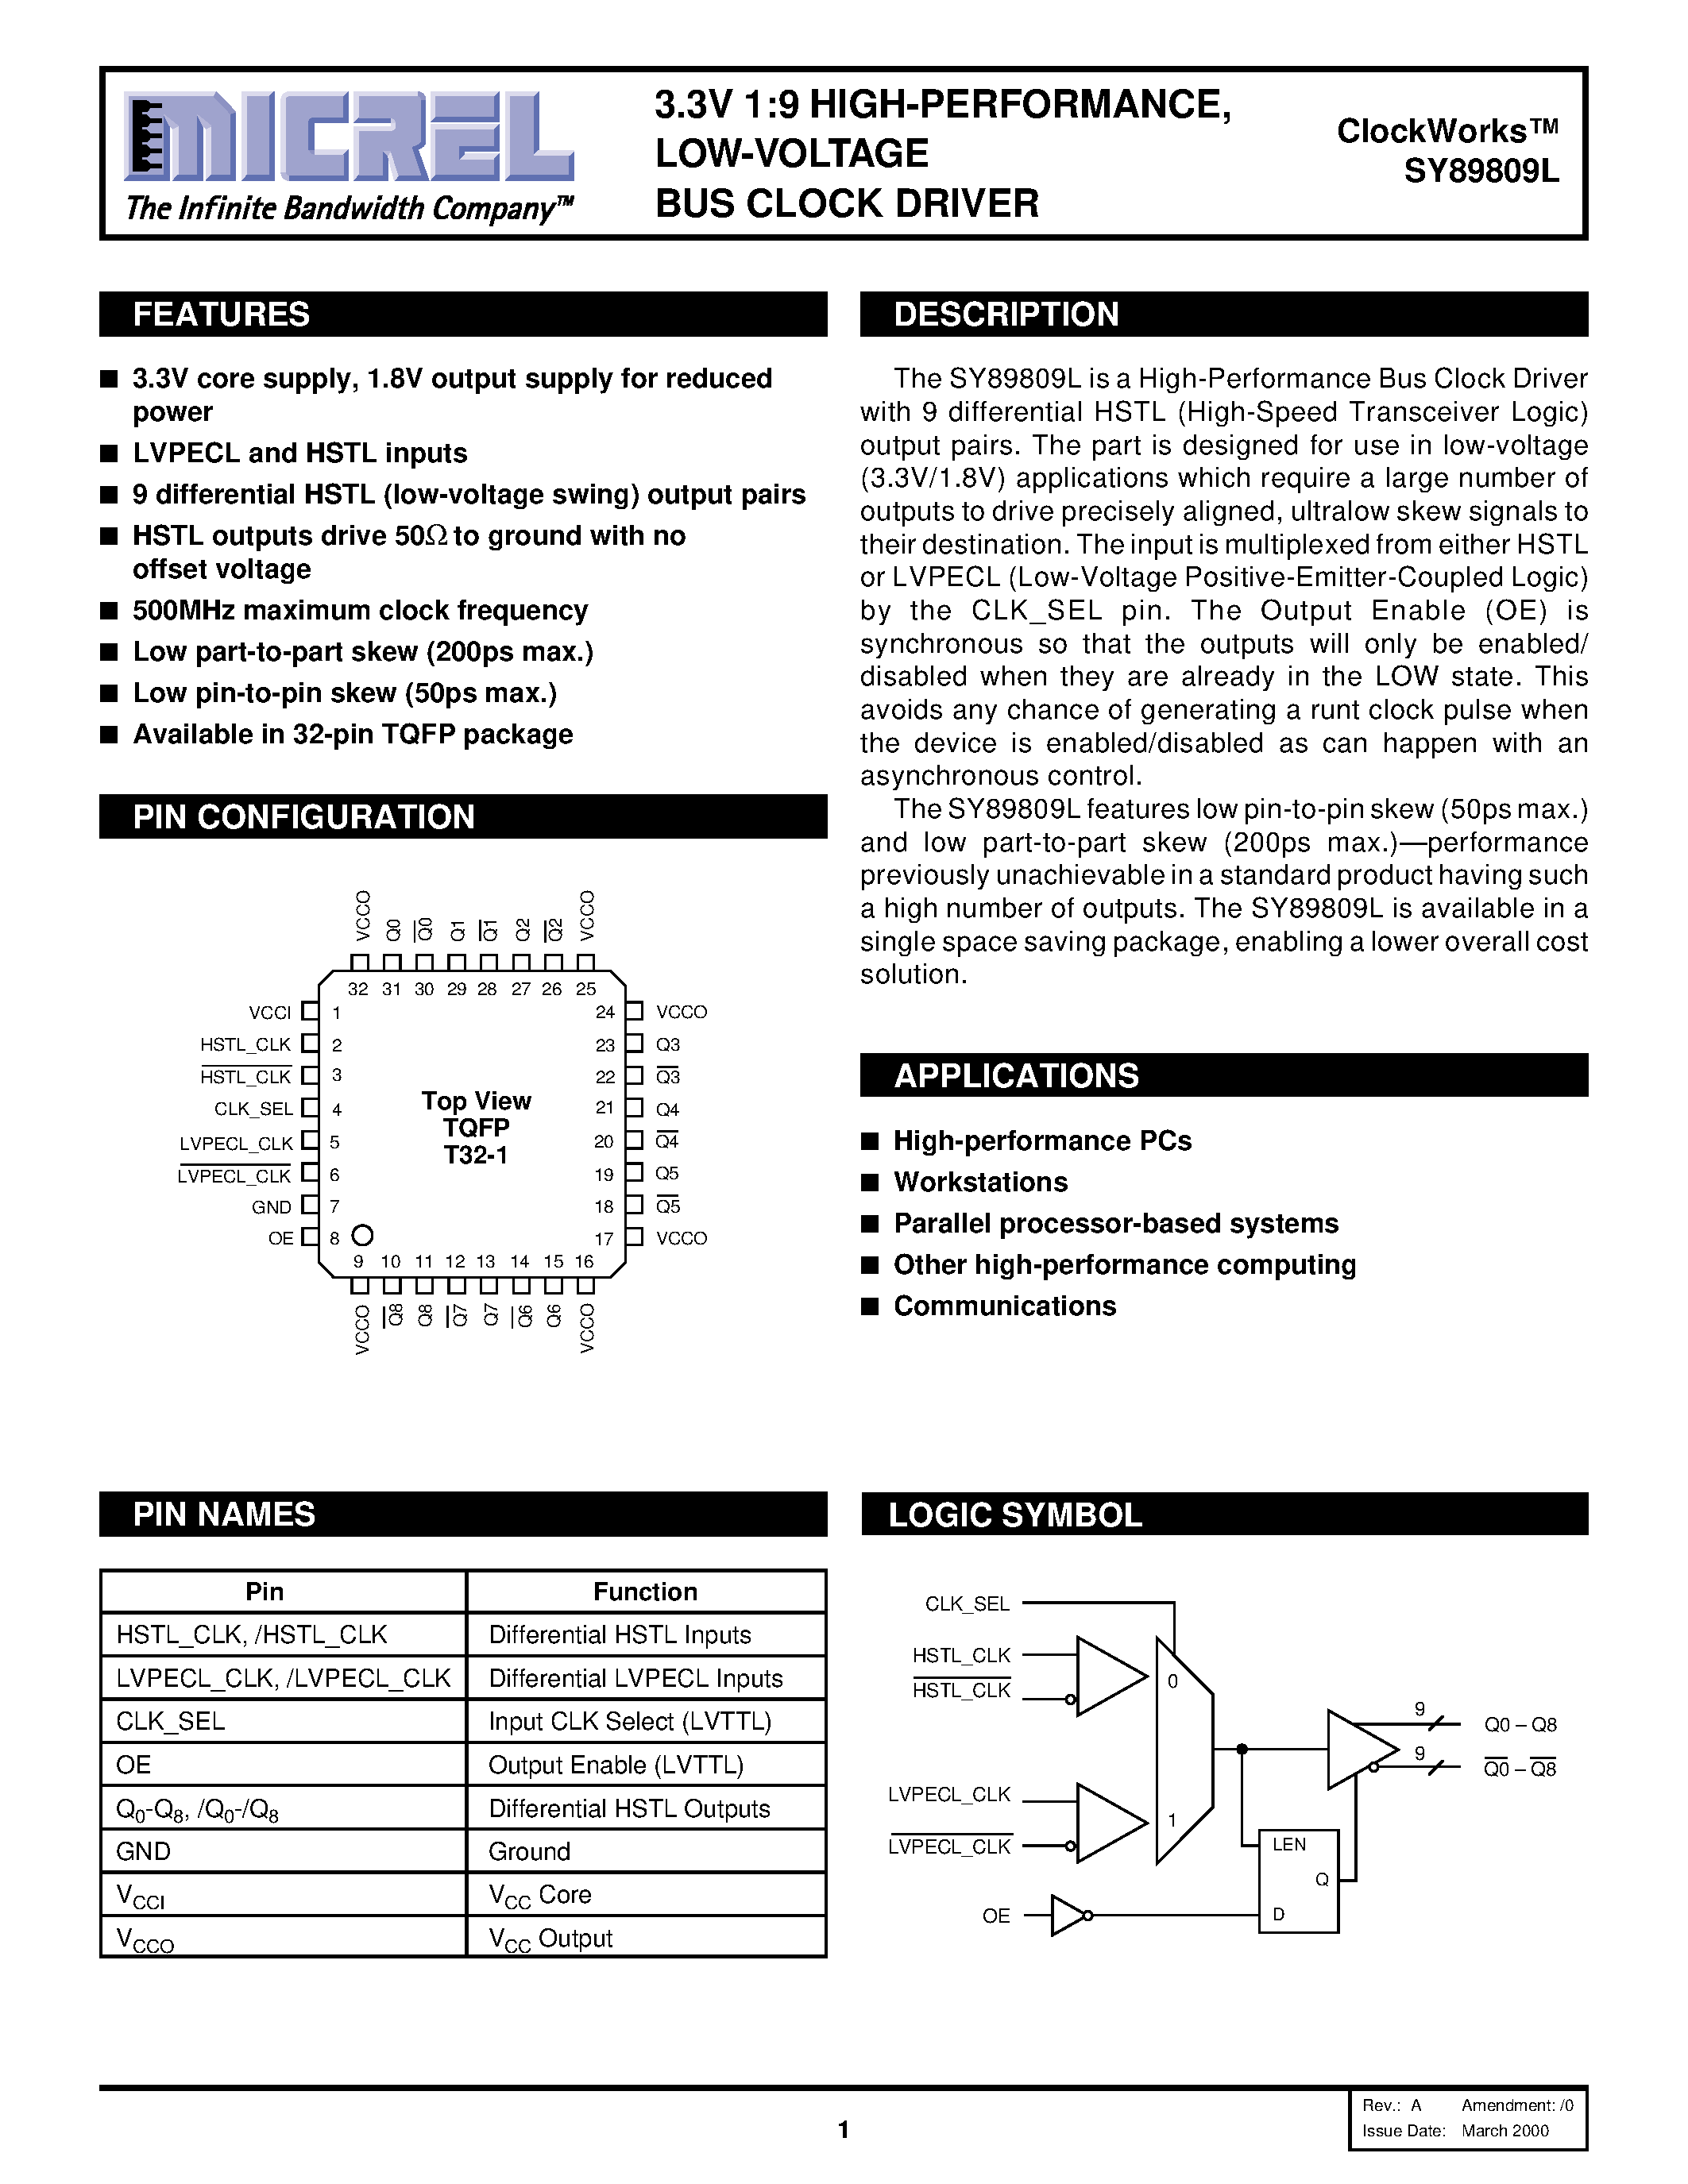 Datasheet SY89809L - 3.3V 1:9 HIGH-PERFORMANCE / LOW-VOLTAGE BUS CLOCK DRIVER page 1